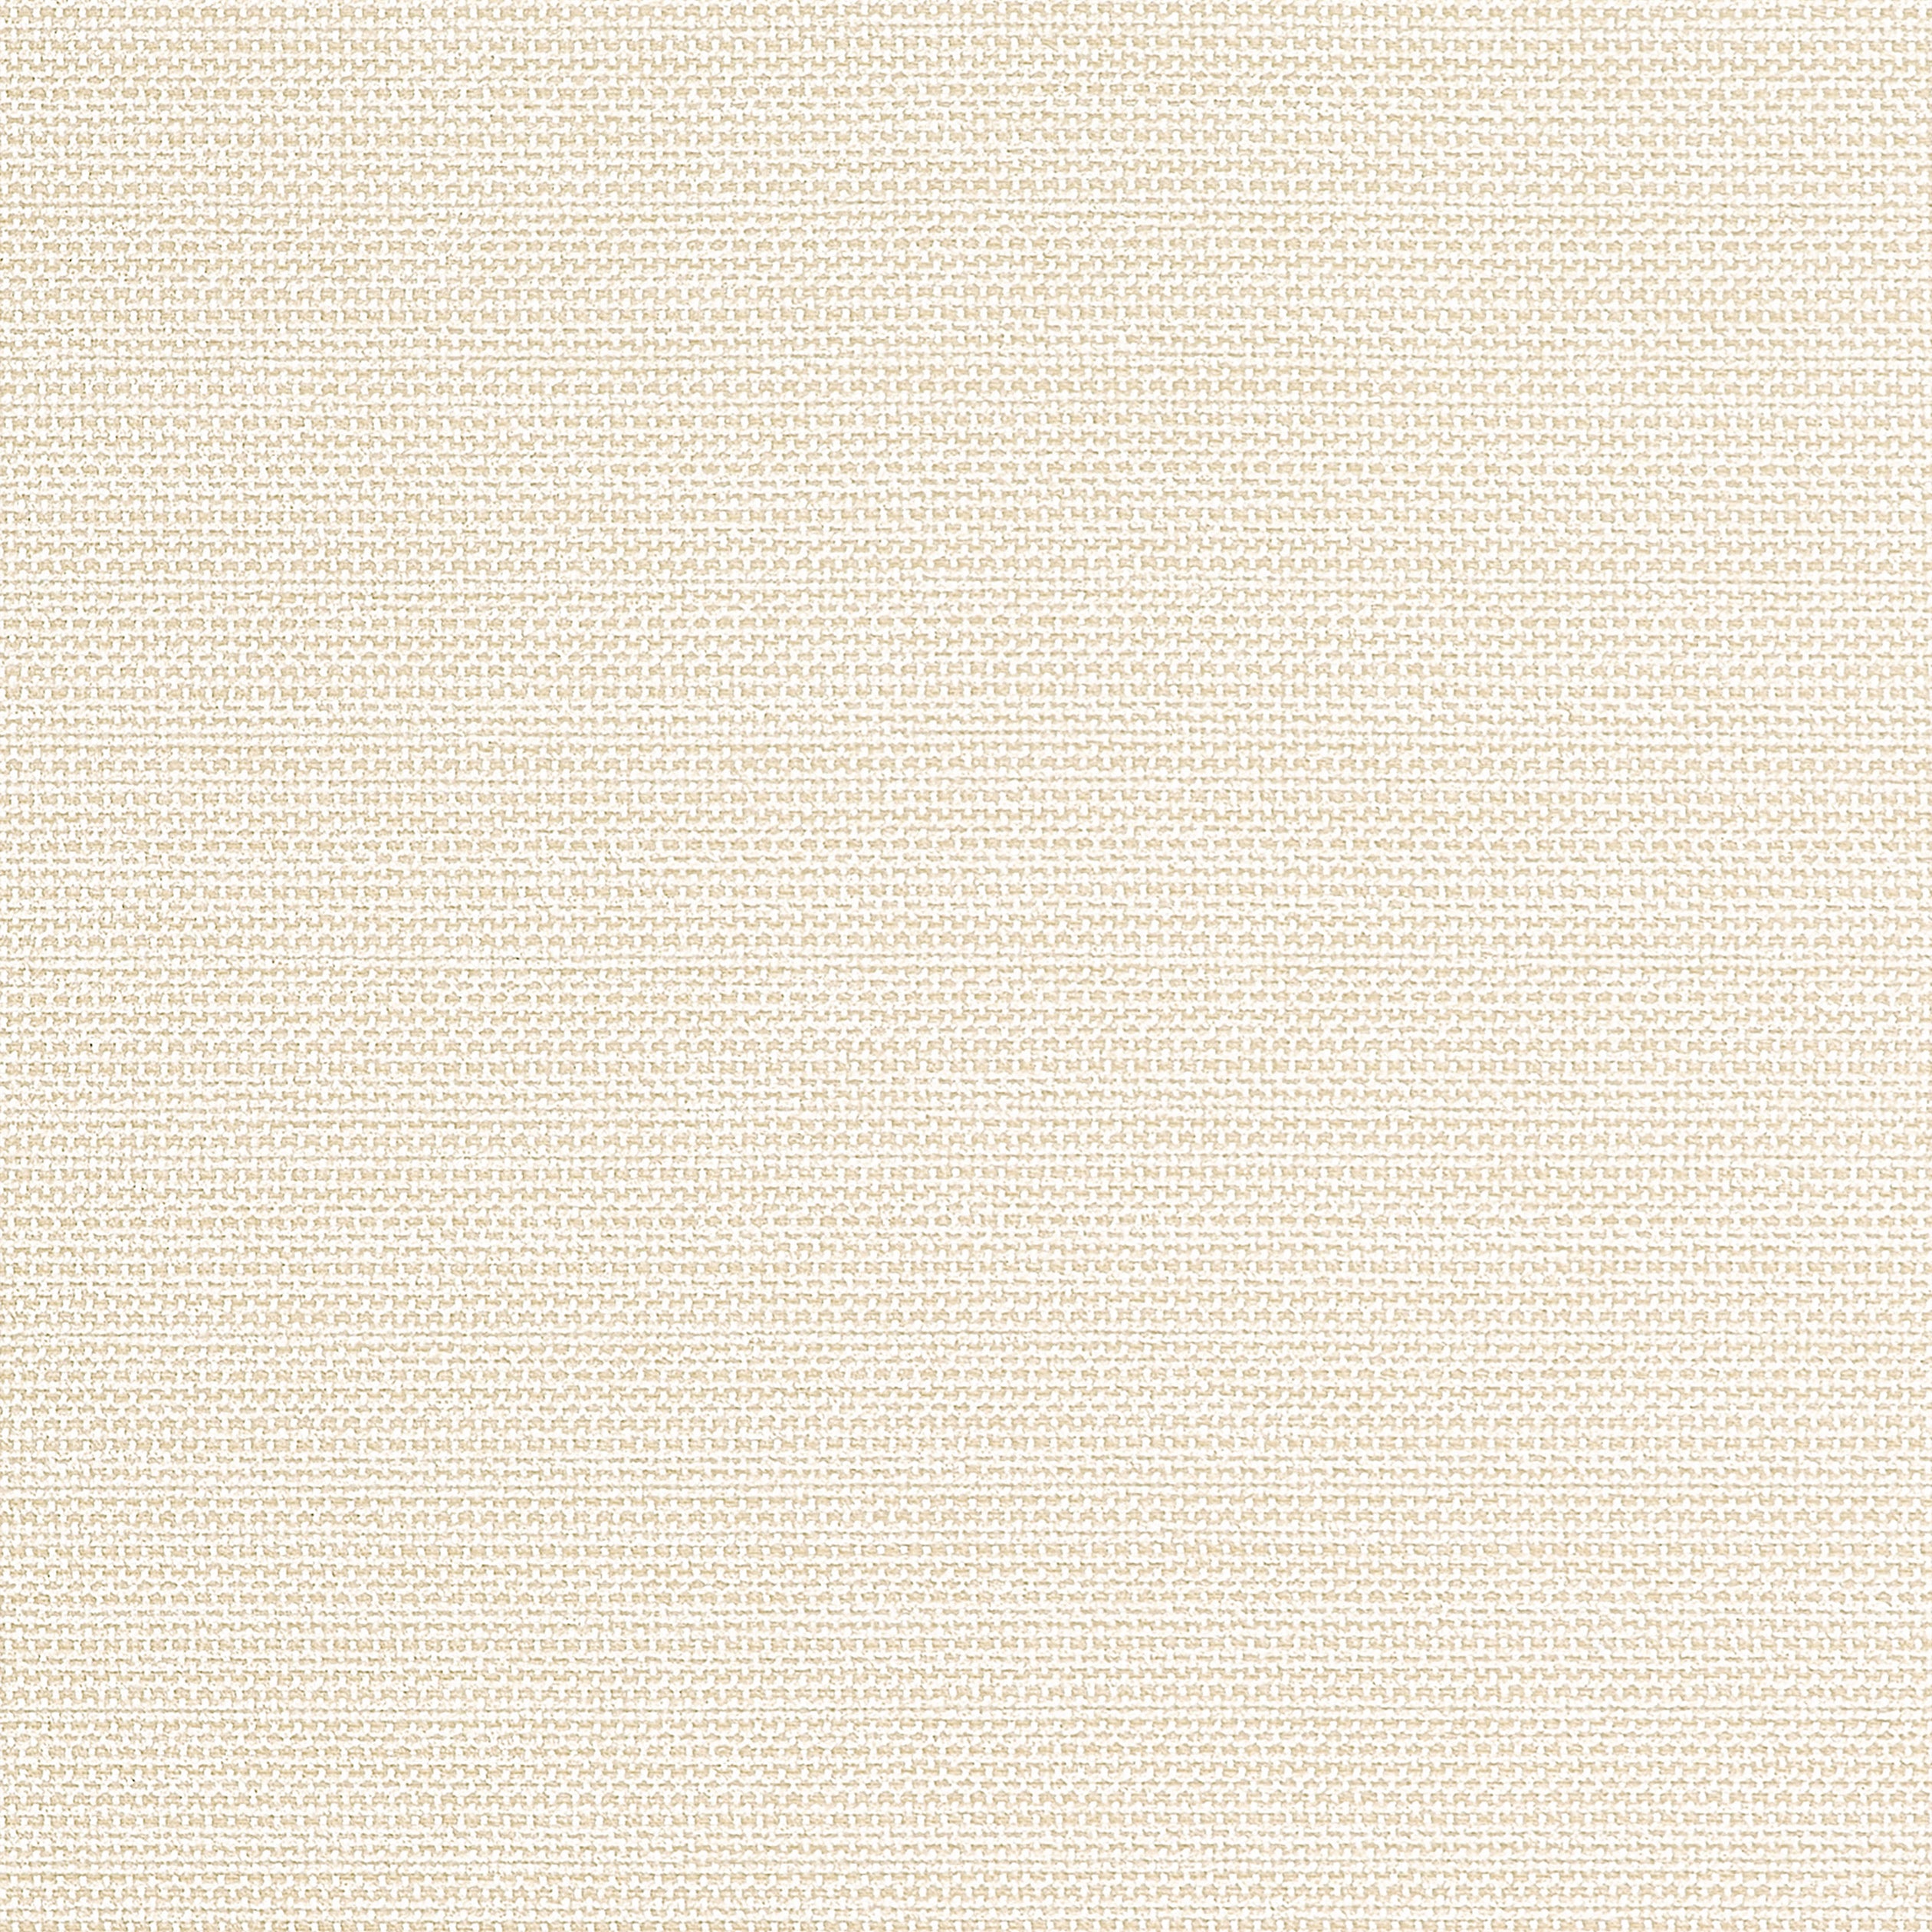 Cameron fabric in sand color - pattern number W81645 - by Thibaut in the Locale collection